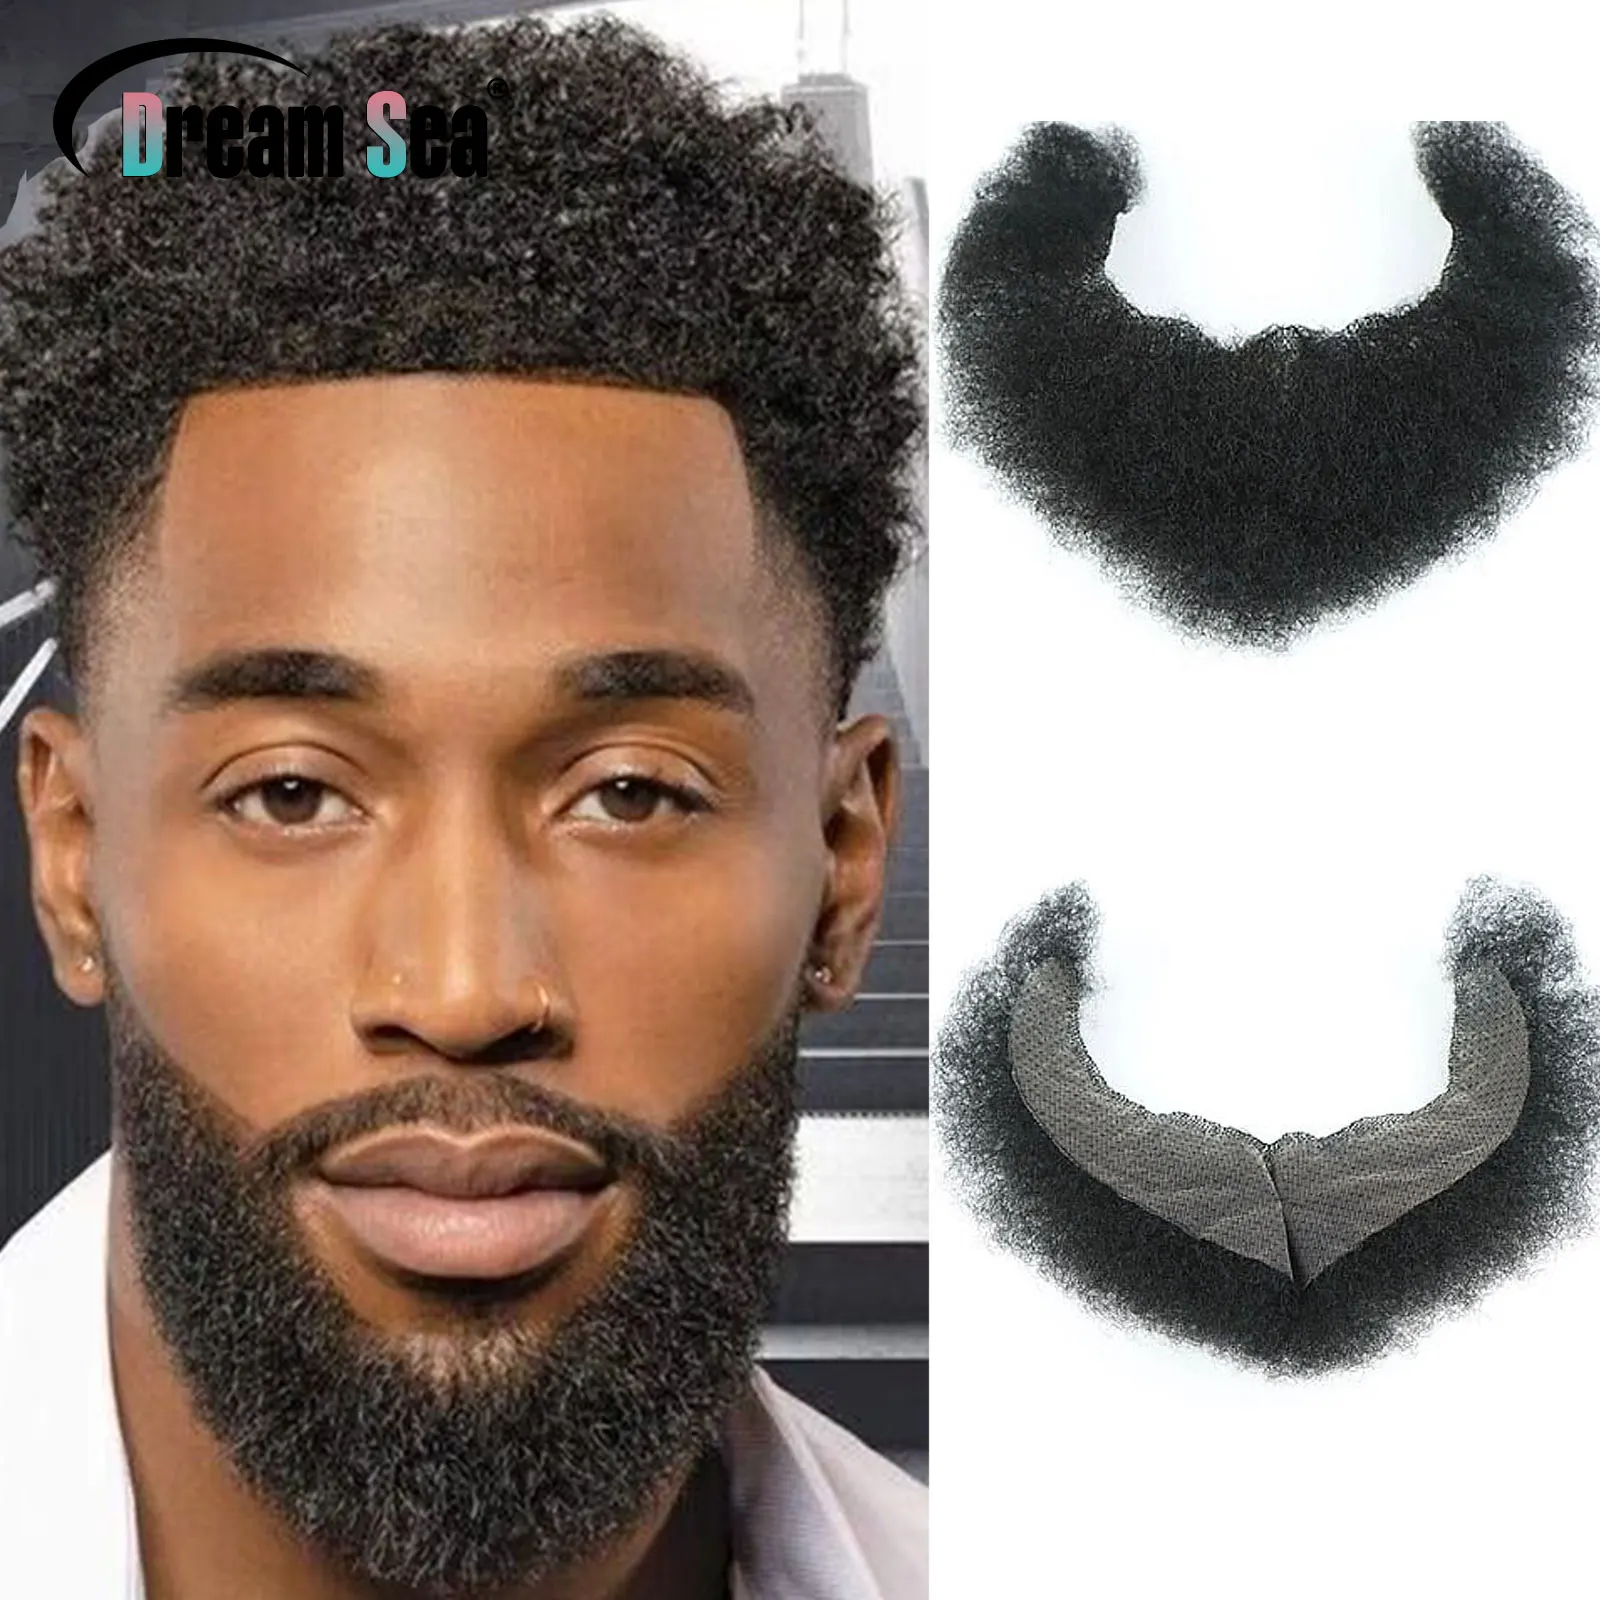 

Afro Curly Face Beard Mustache Human Hair For Black Men Curly Realistic Black Bearded Makeup Lace Base Replace System